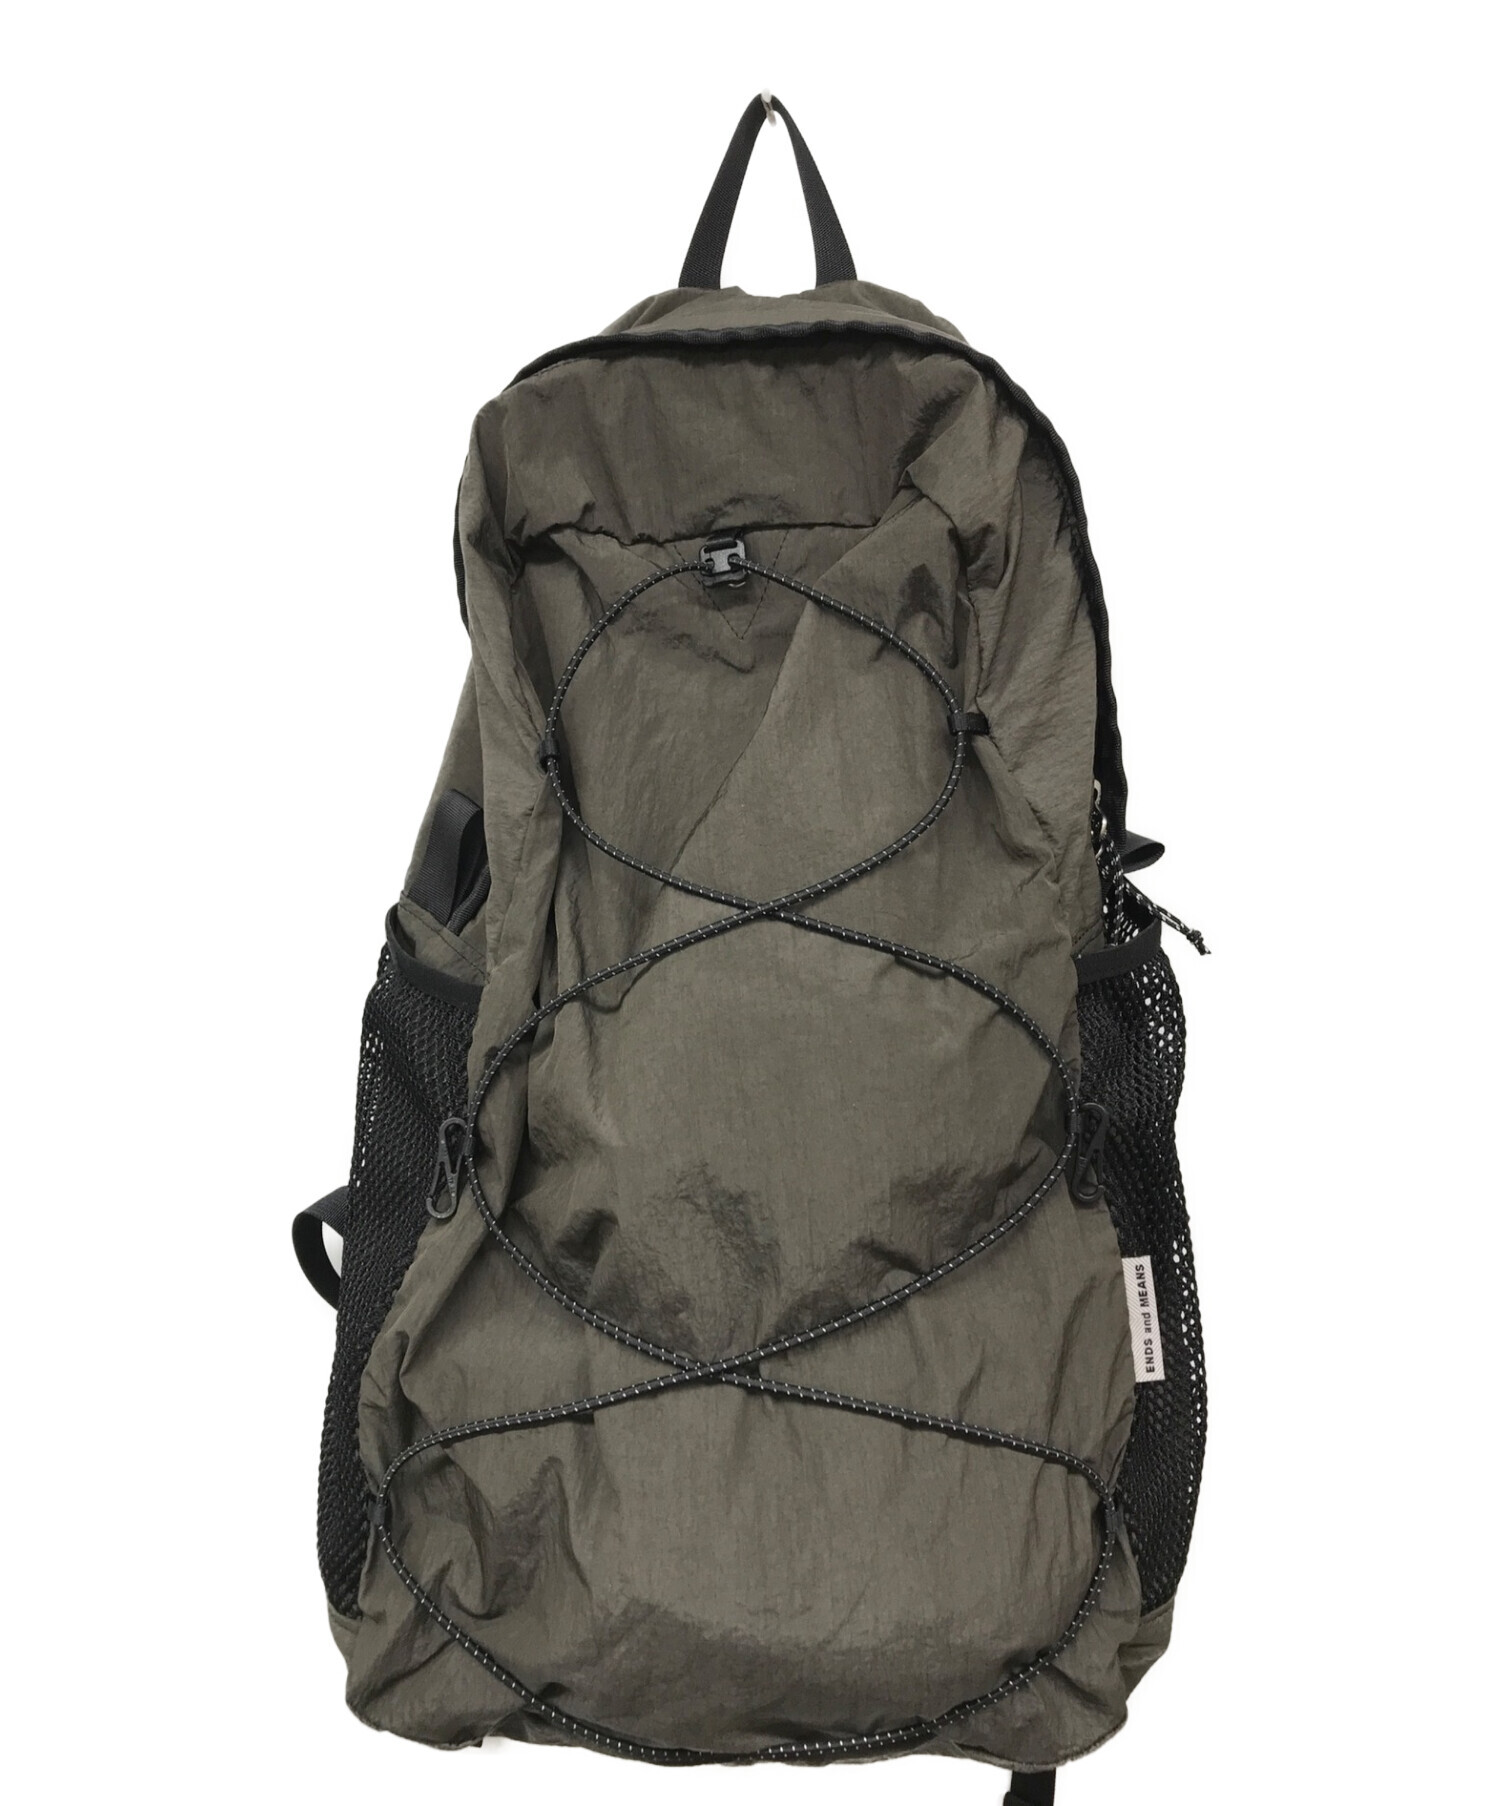 Ends and Means Packable Backpack 2021 - リュック/バックパック